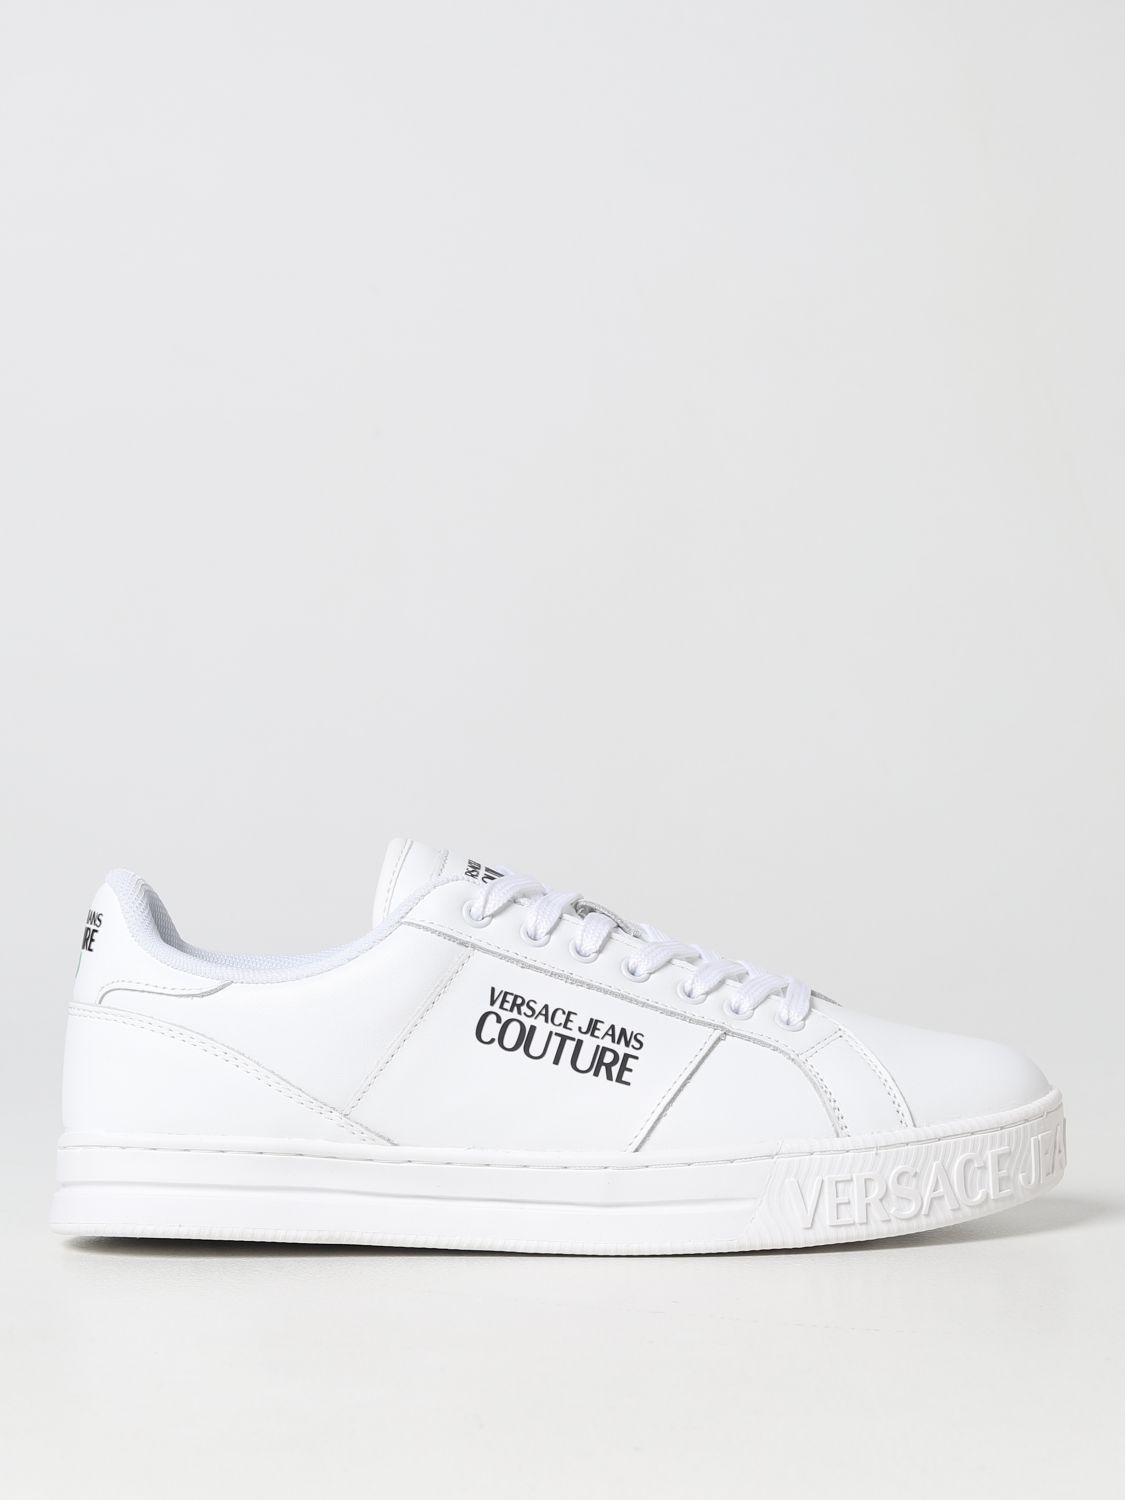 VERSACE JEANS COUTURE SNEAKERS VERSACE JEANS COUTURE MEN COLOR WHITE,d69011001